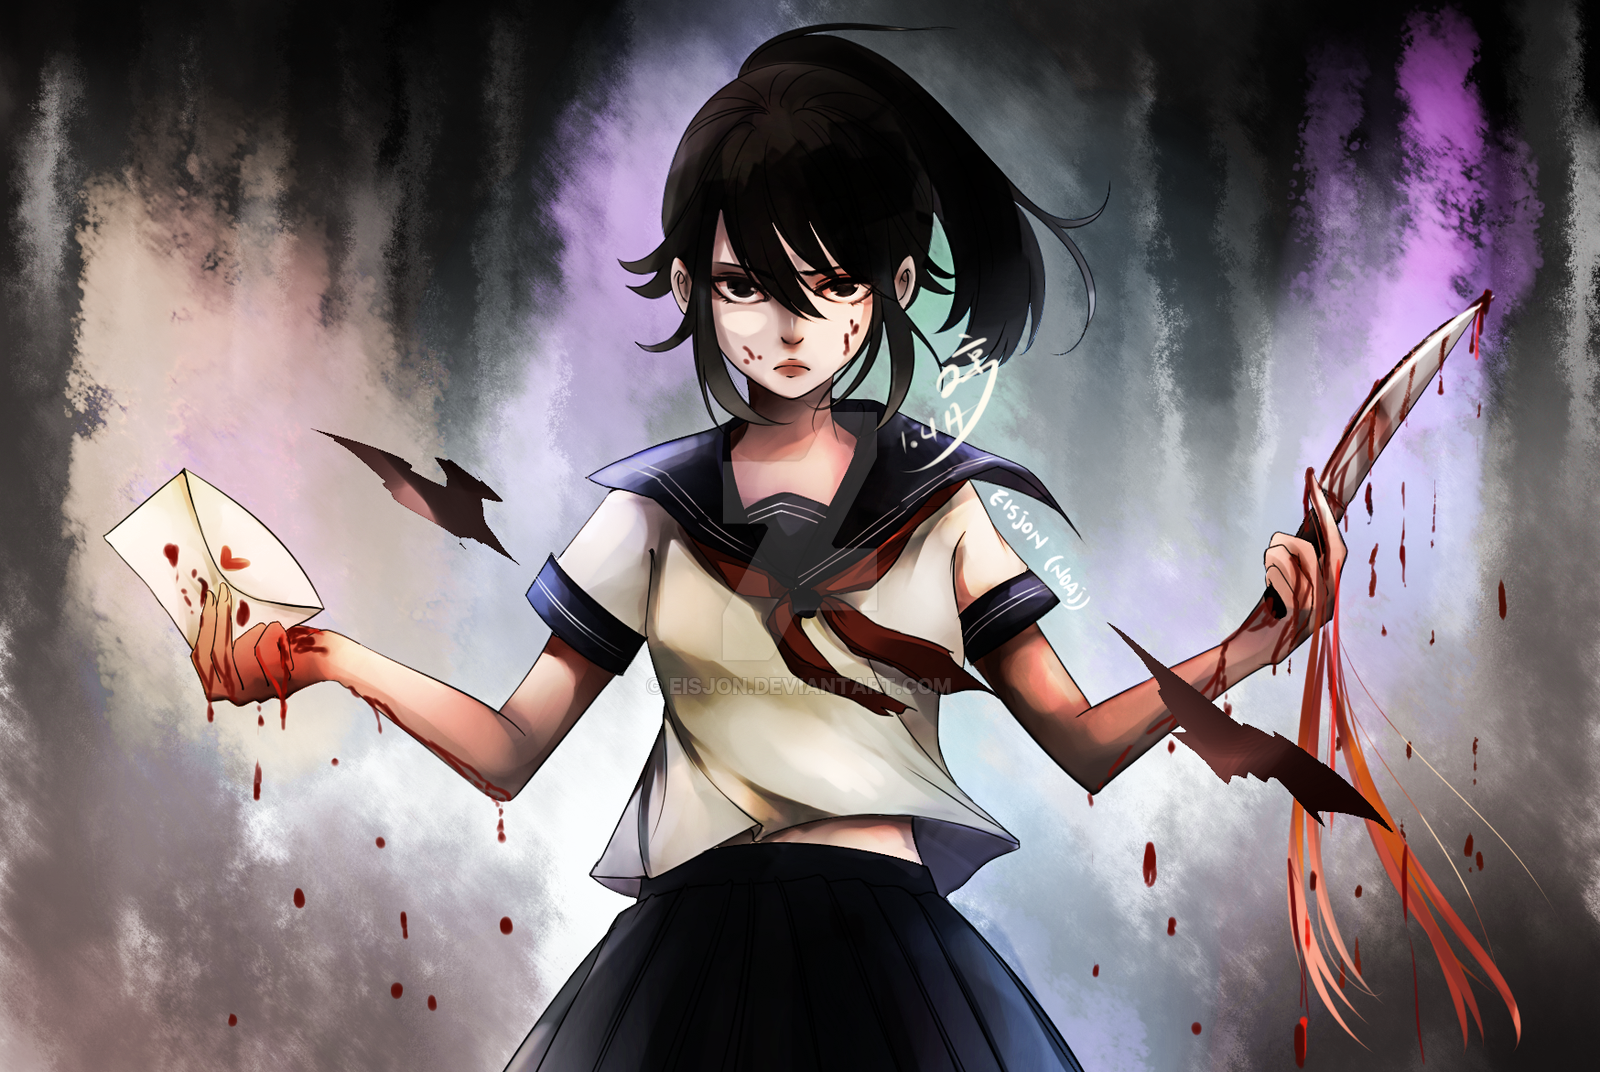 Yandere Simulator Get A New Trailer Detailing The Delinquents